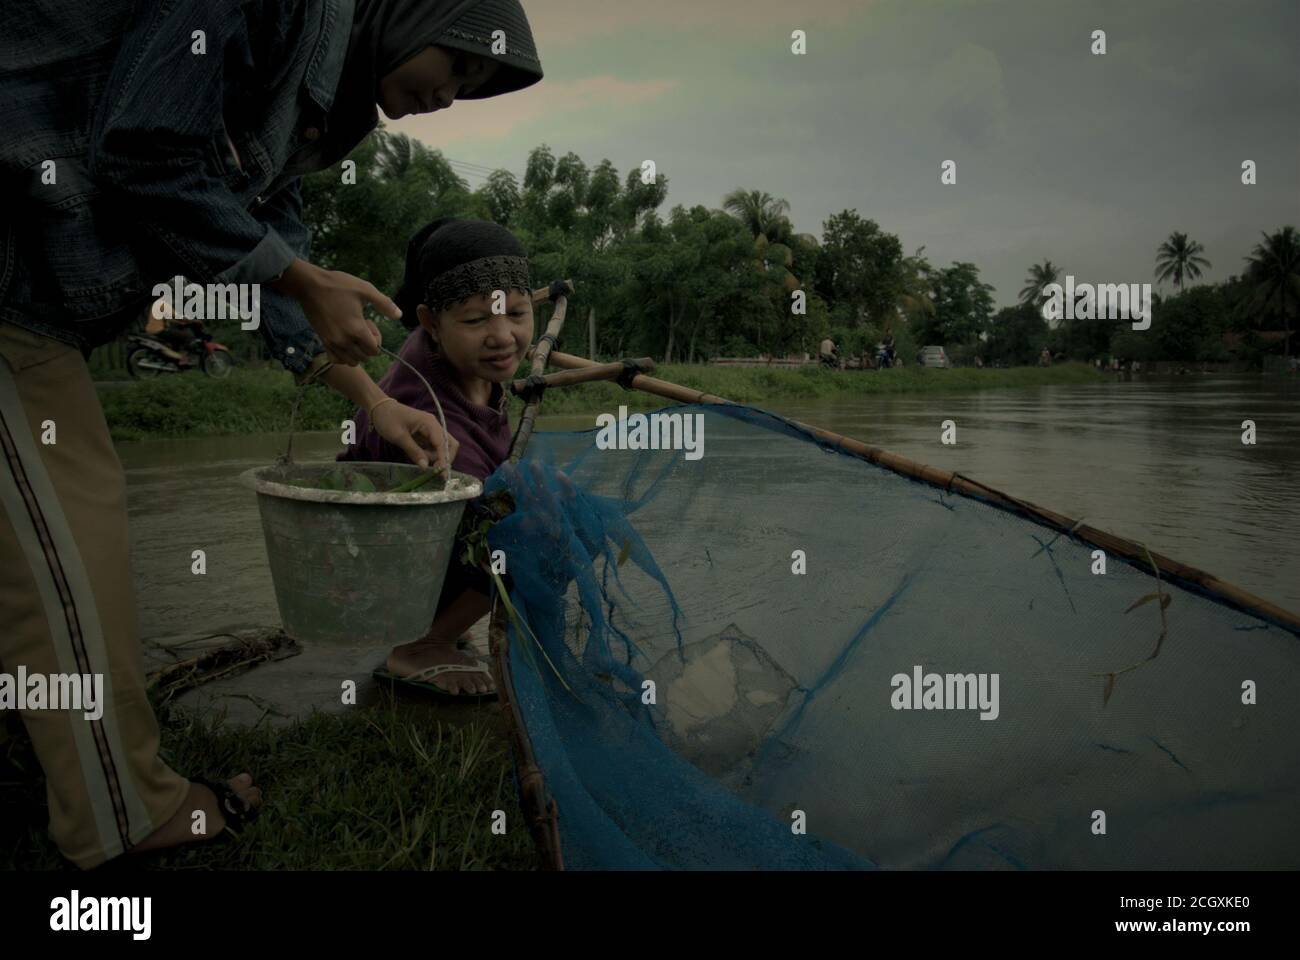 A woman handling pushnet while her friend carrying plastic bucket containing the catch as they fish on an irrigation canal in Karawang, Indonesia. Stock Photo